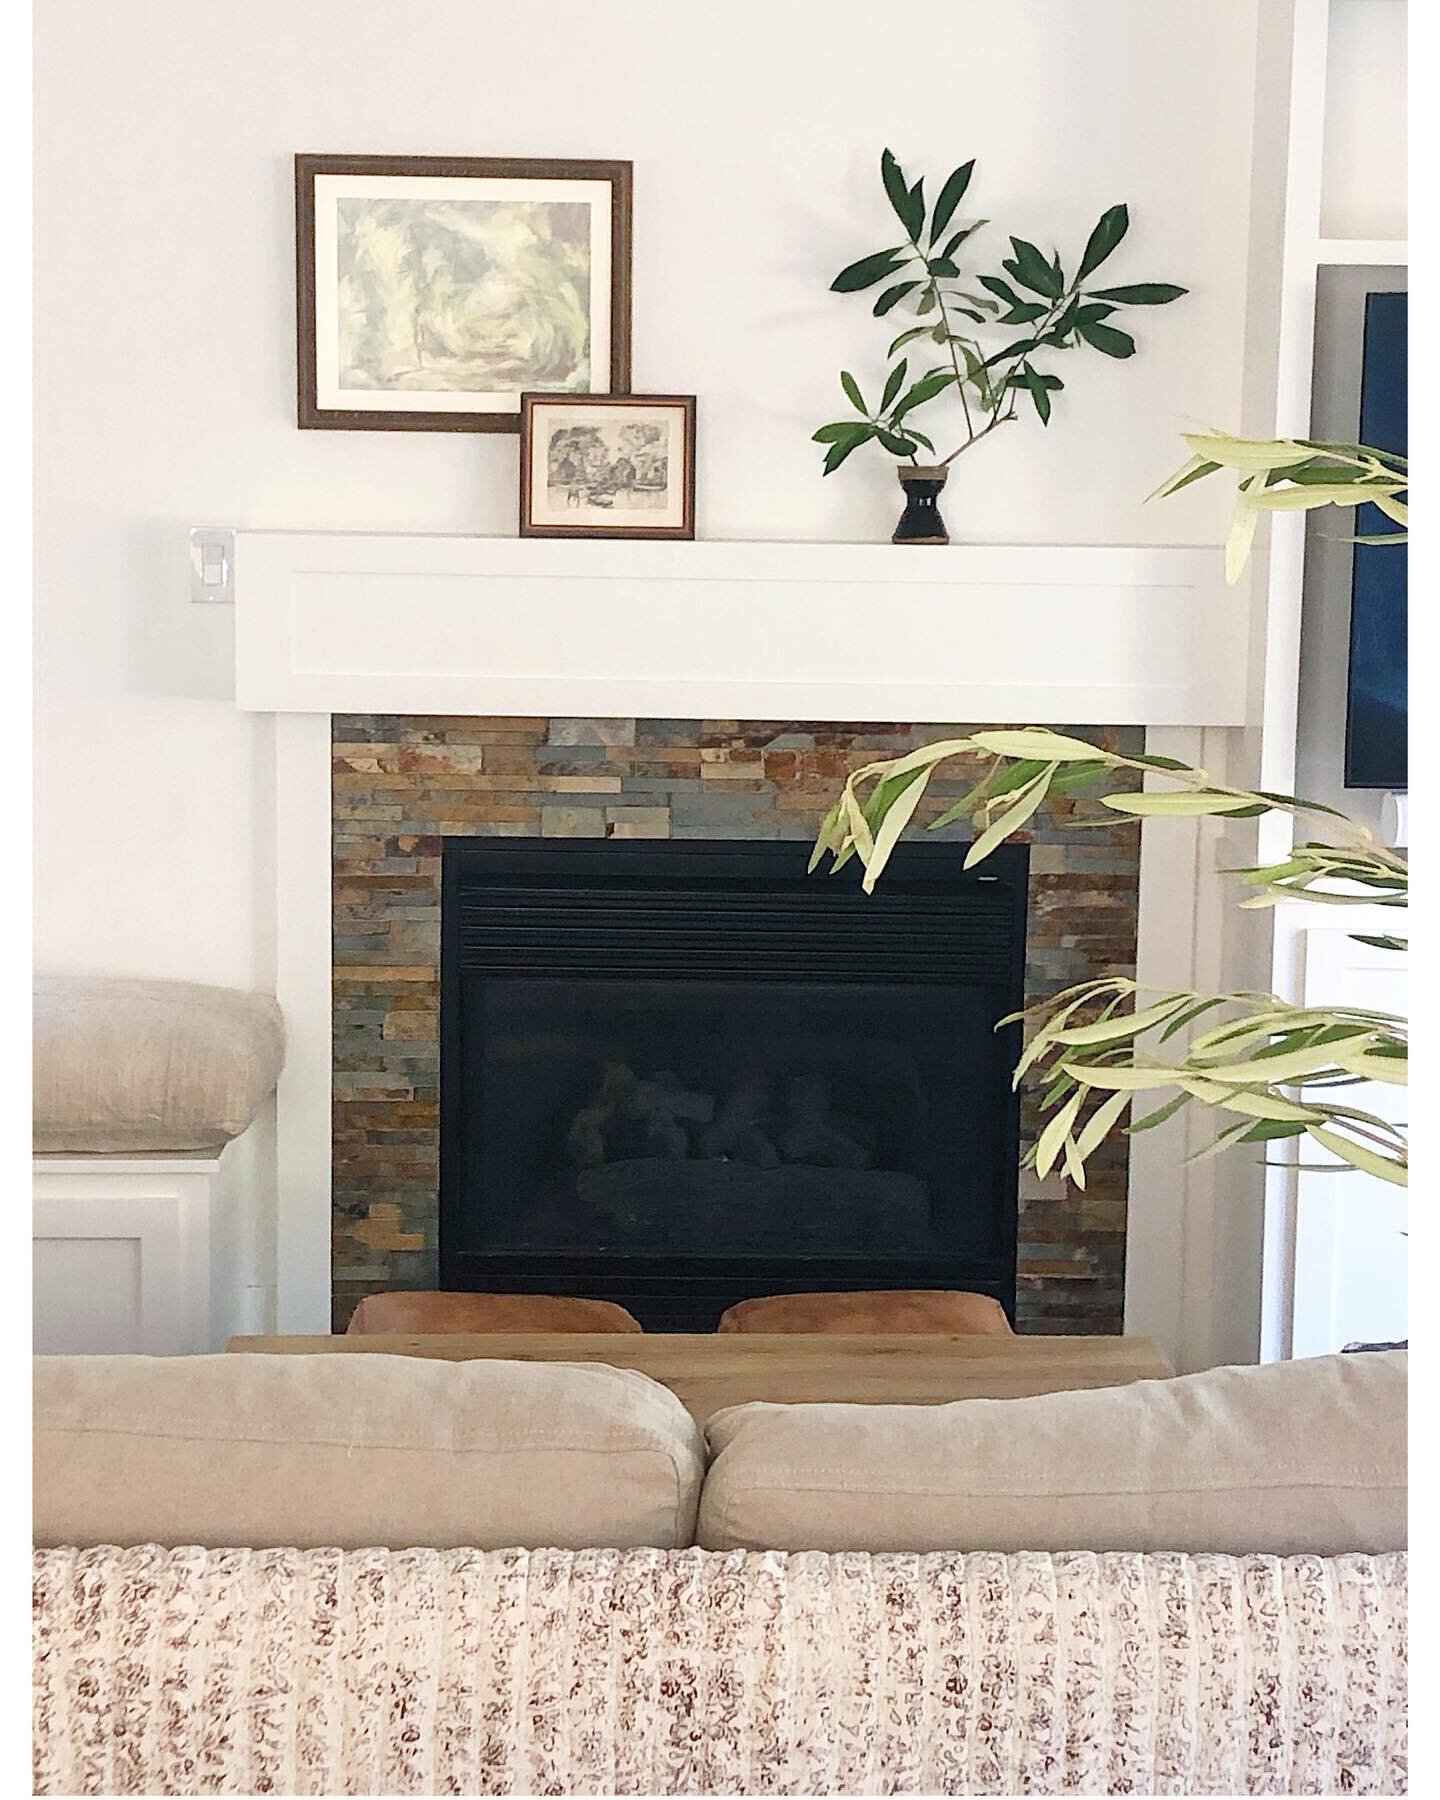 Another #stylingmoment 

#interiordesign #fireplacemantle